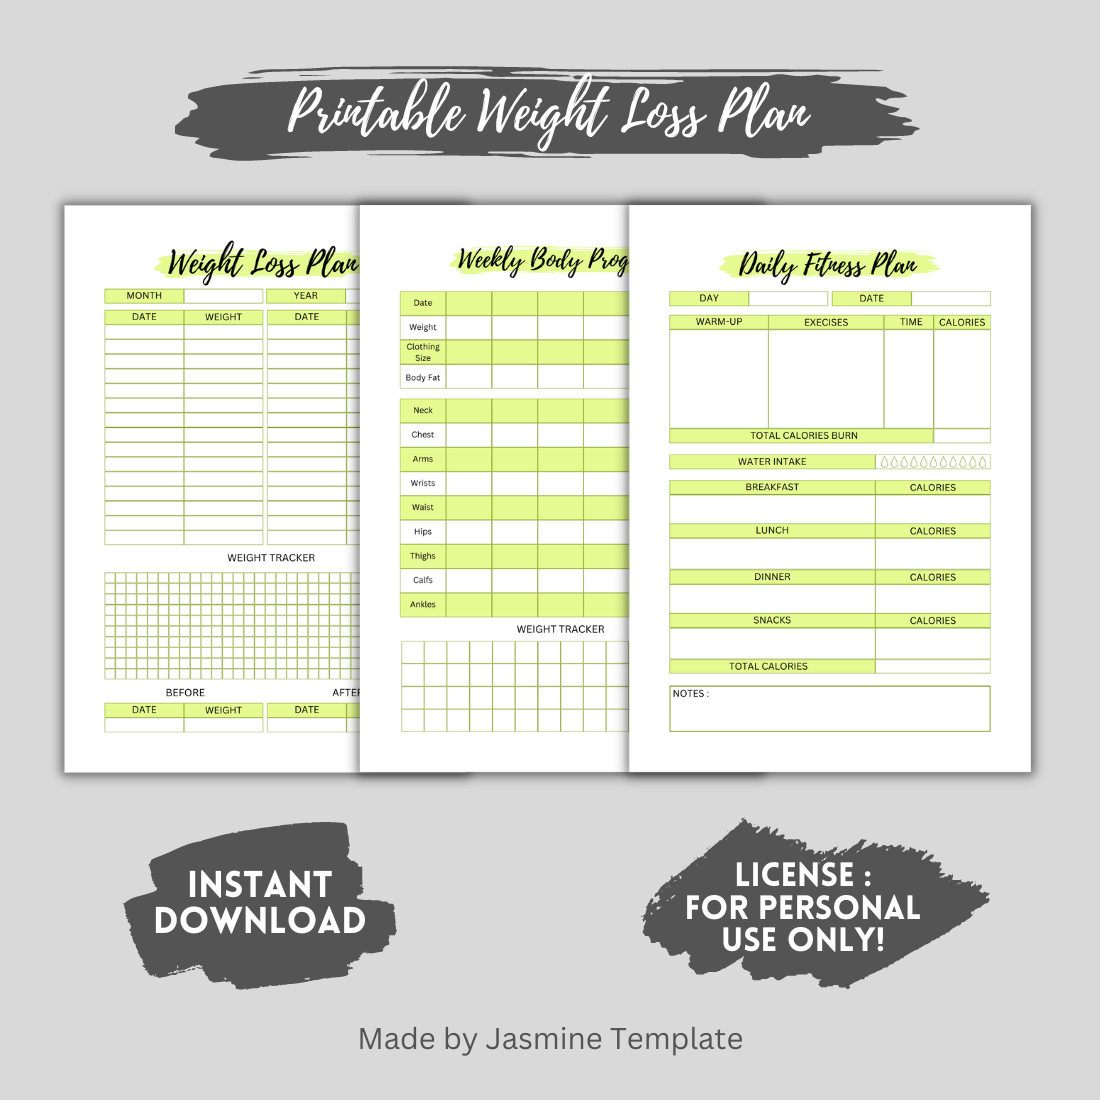 Printable Personal Weight Loss Planner main cover.